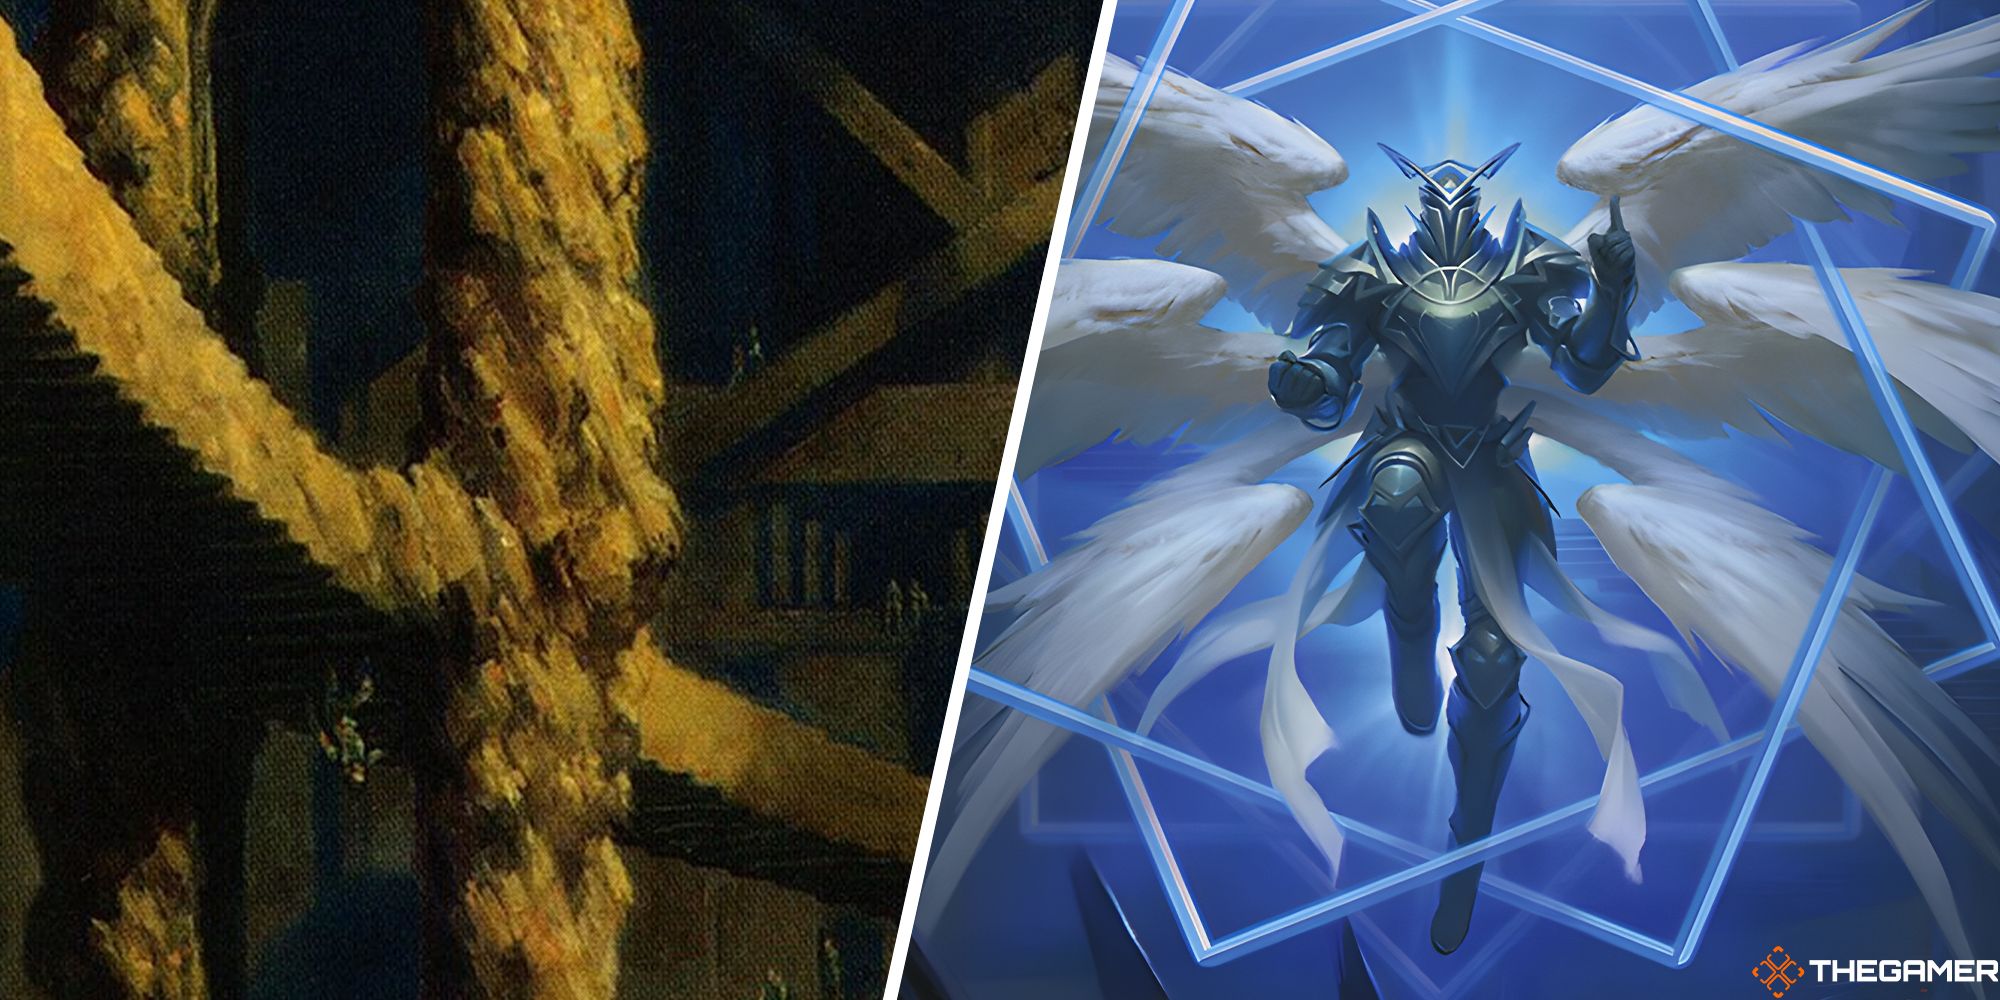 Magic: The Gathering Fans Want Setting Only Seen On Three Cards For A Full Set